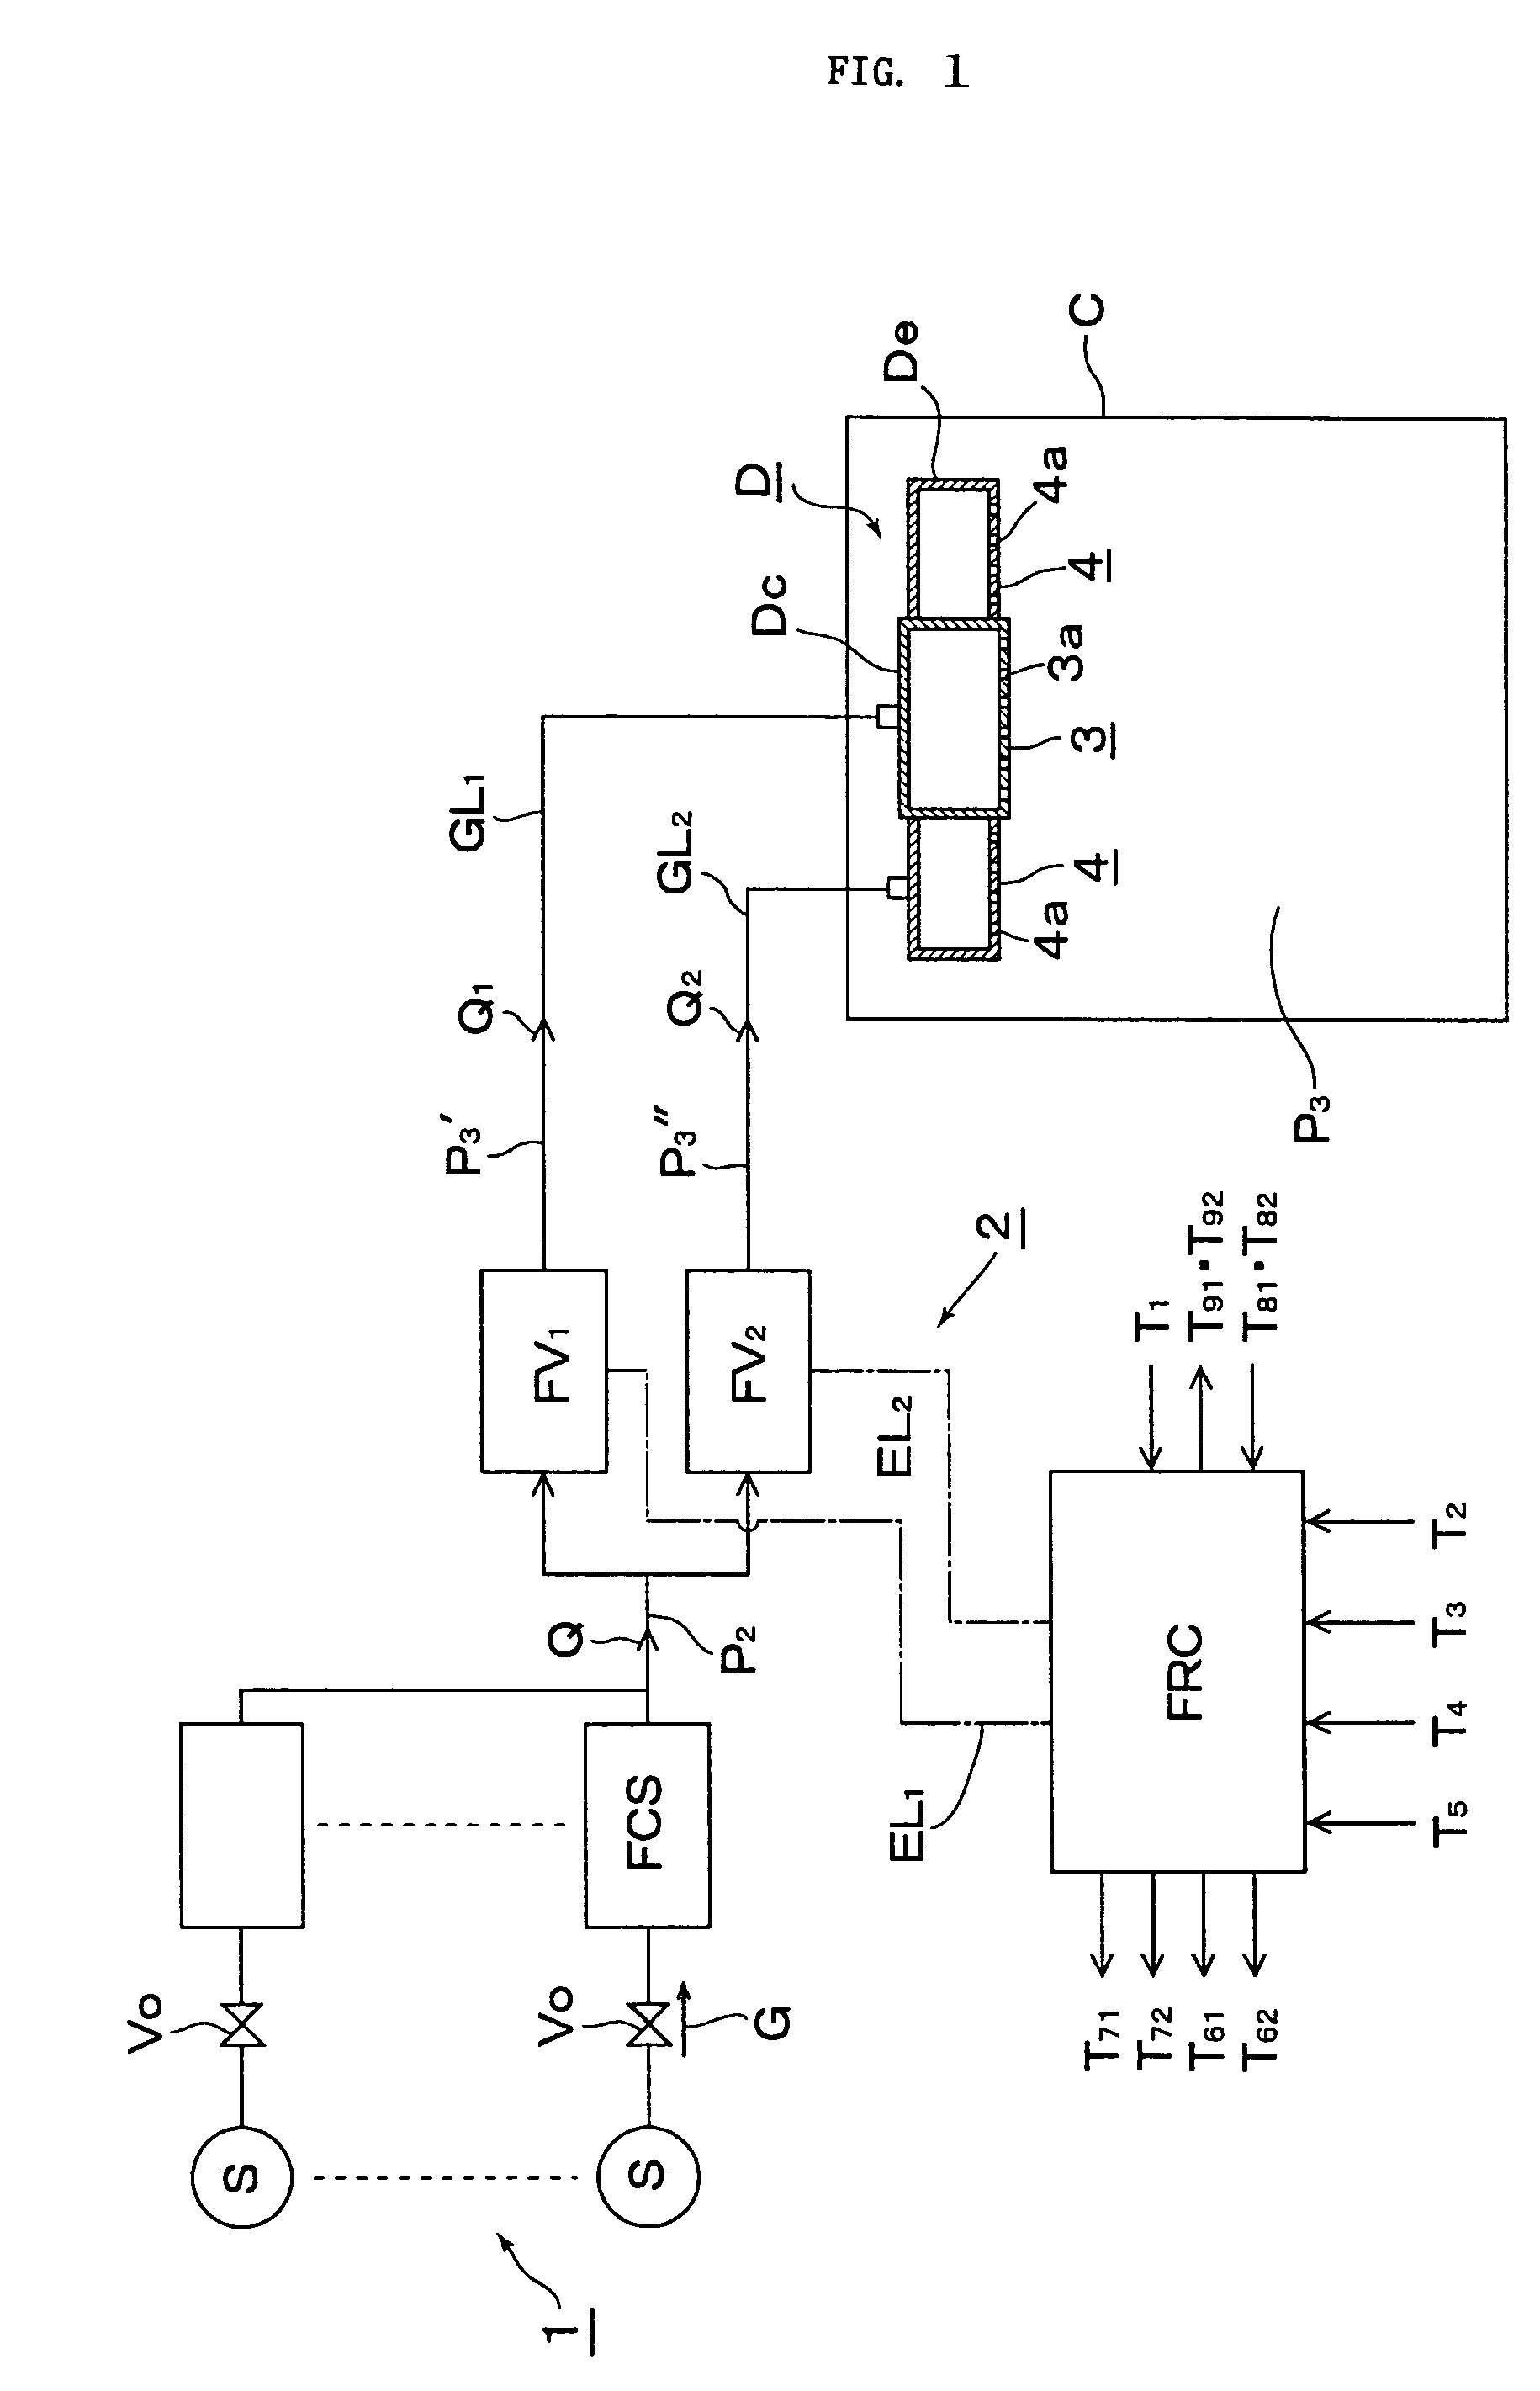 Method of supplying divided gas to a chamber from a gas supply apparatus equipped with a flow-rate control system